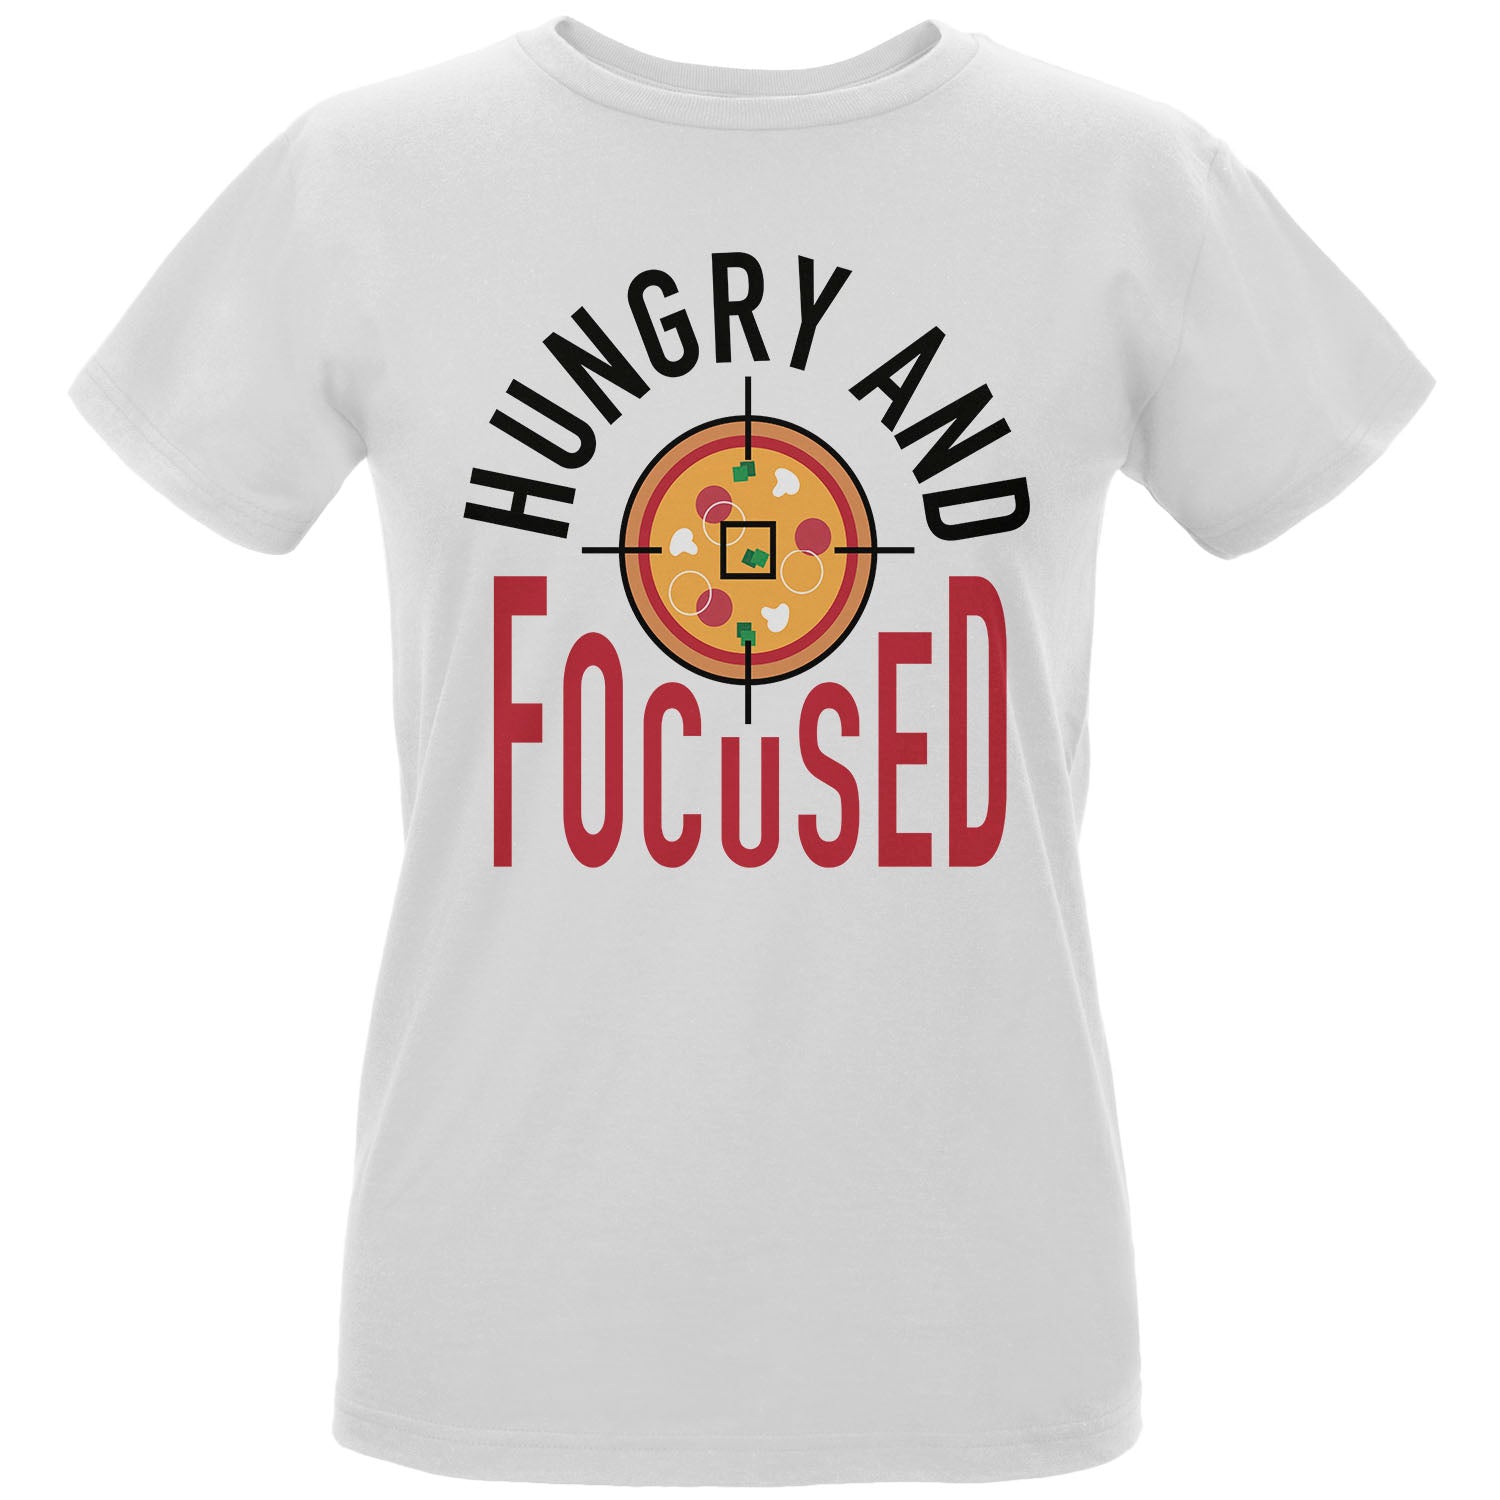 Hungry and Focused Women's T-Shirt